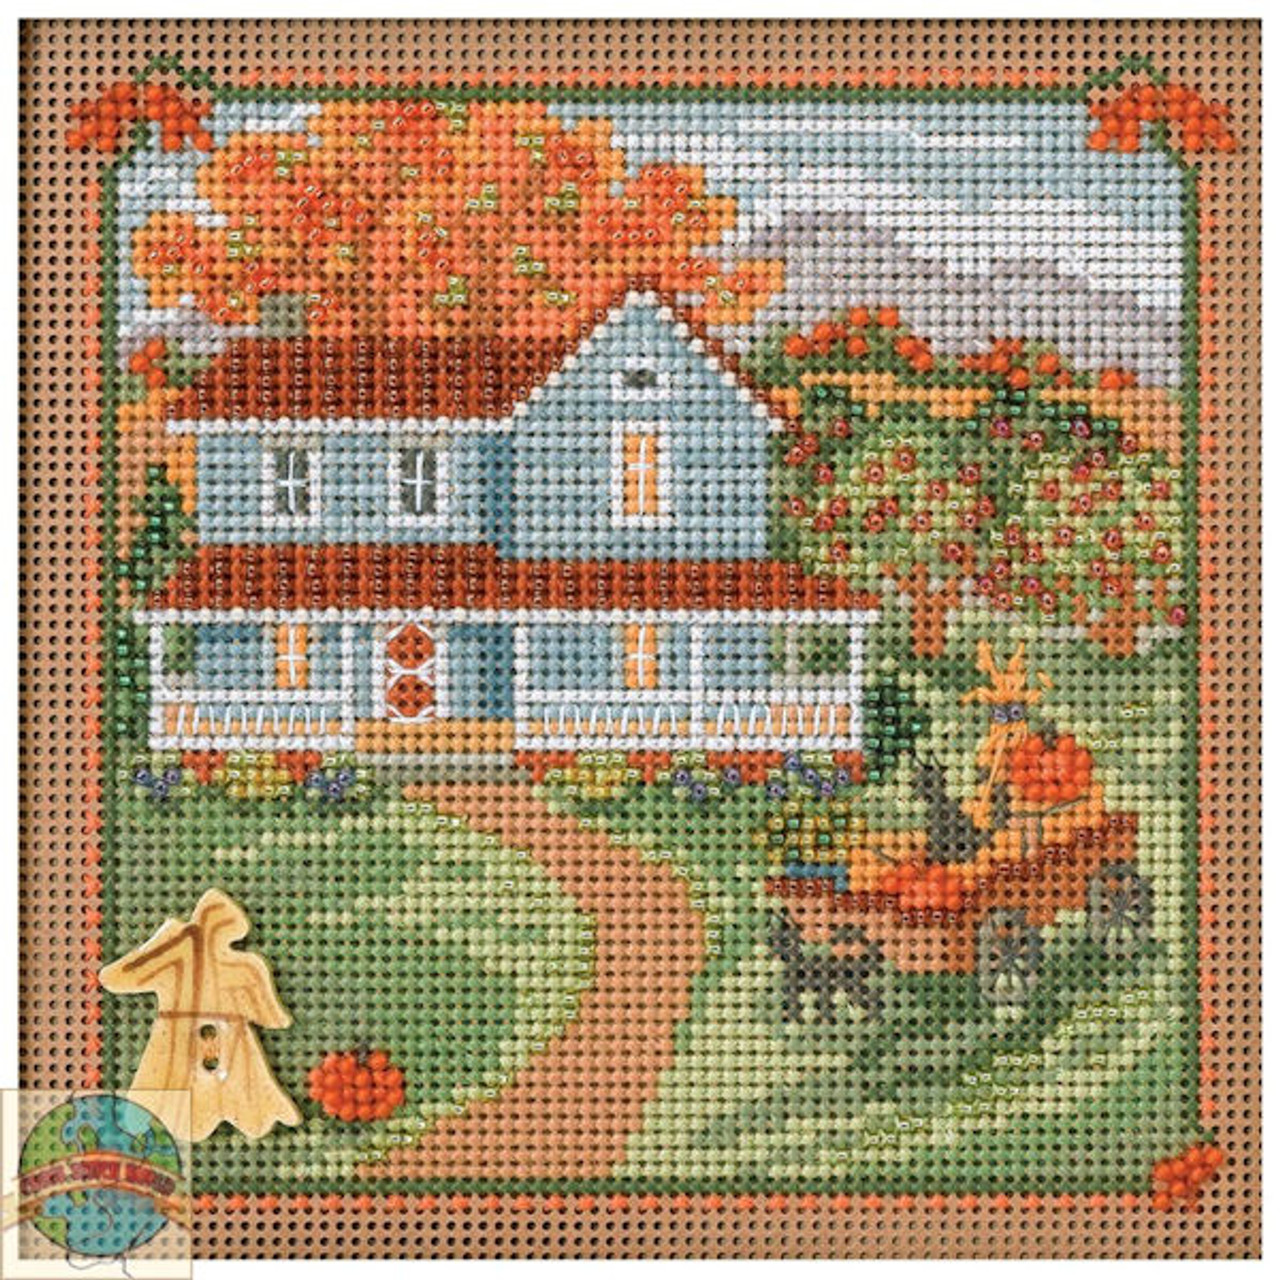 Home Of The Brave Beaded Counted Cross Stitch Kit Mill Hill 2019 Patriotic Quartet Collection Mh171913 Counted Kits